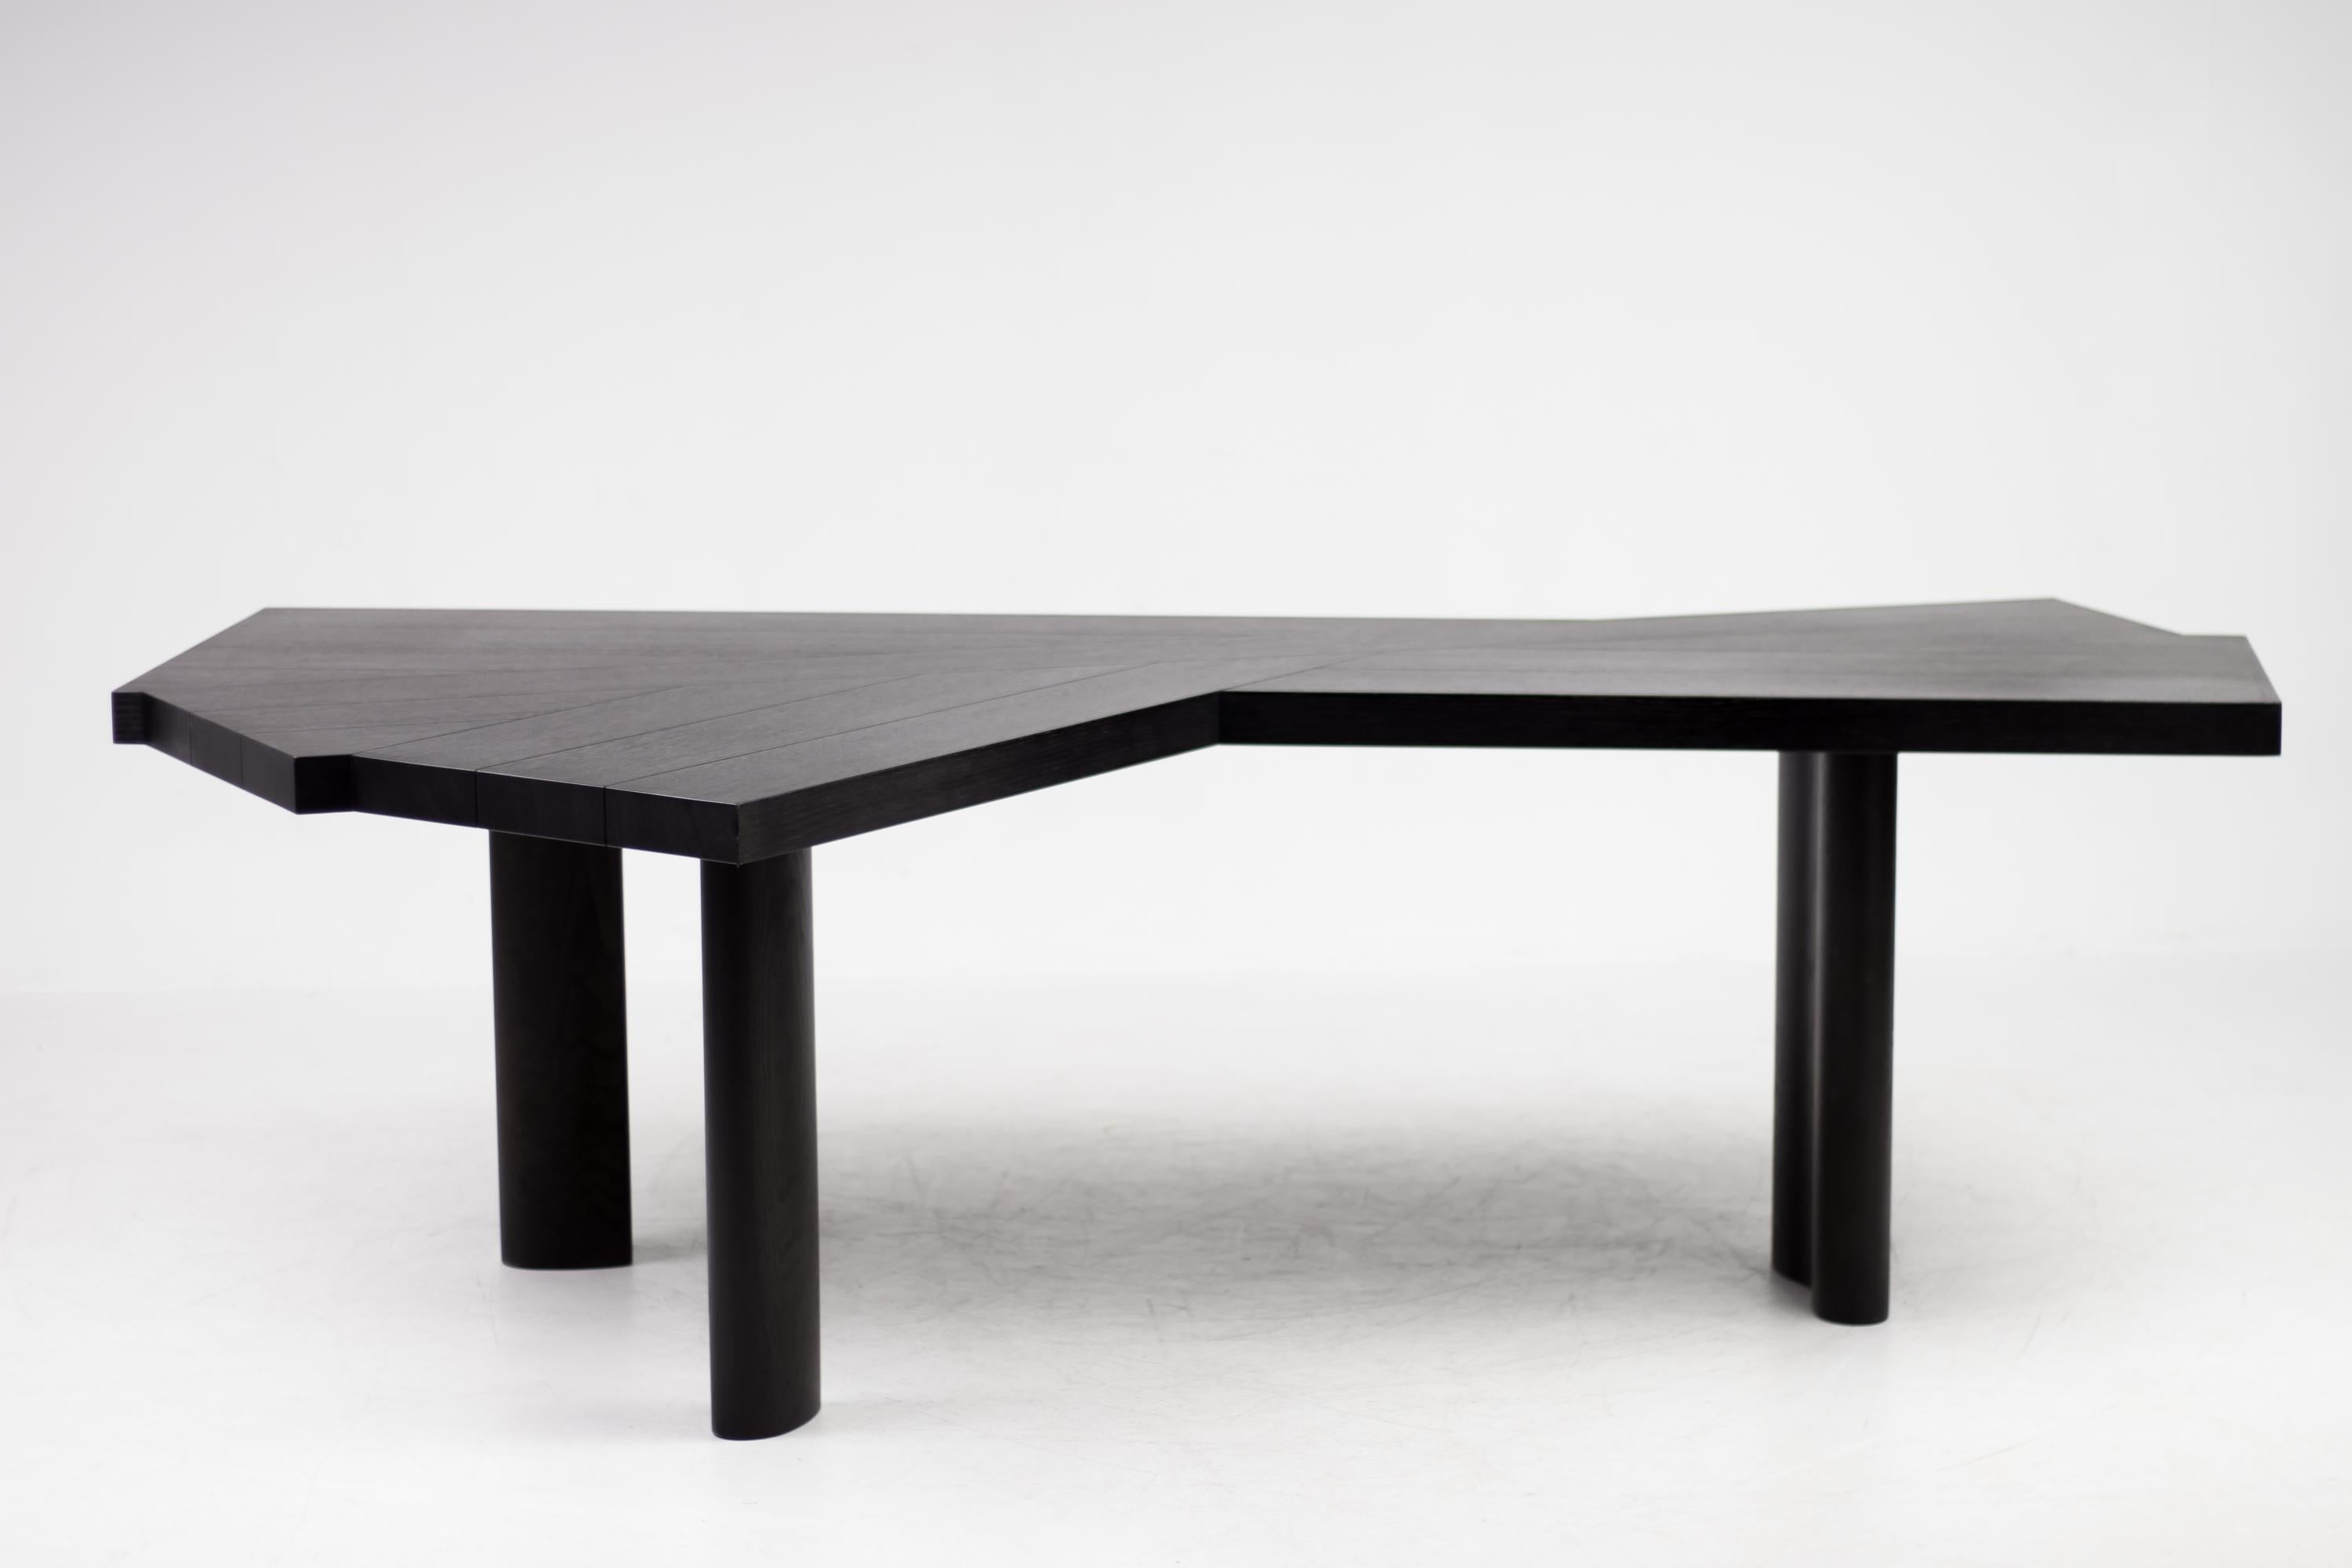 Table in black stained oak. The tabletop is composed of fourteen beams; the base has three legs.
The special configuration of the top and the leg placement allow dynamic and flexible table usage, also by a greater number of persons compared to a